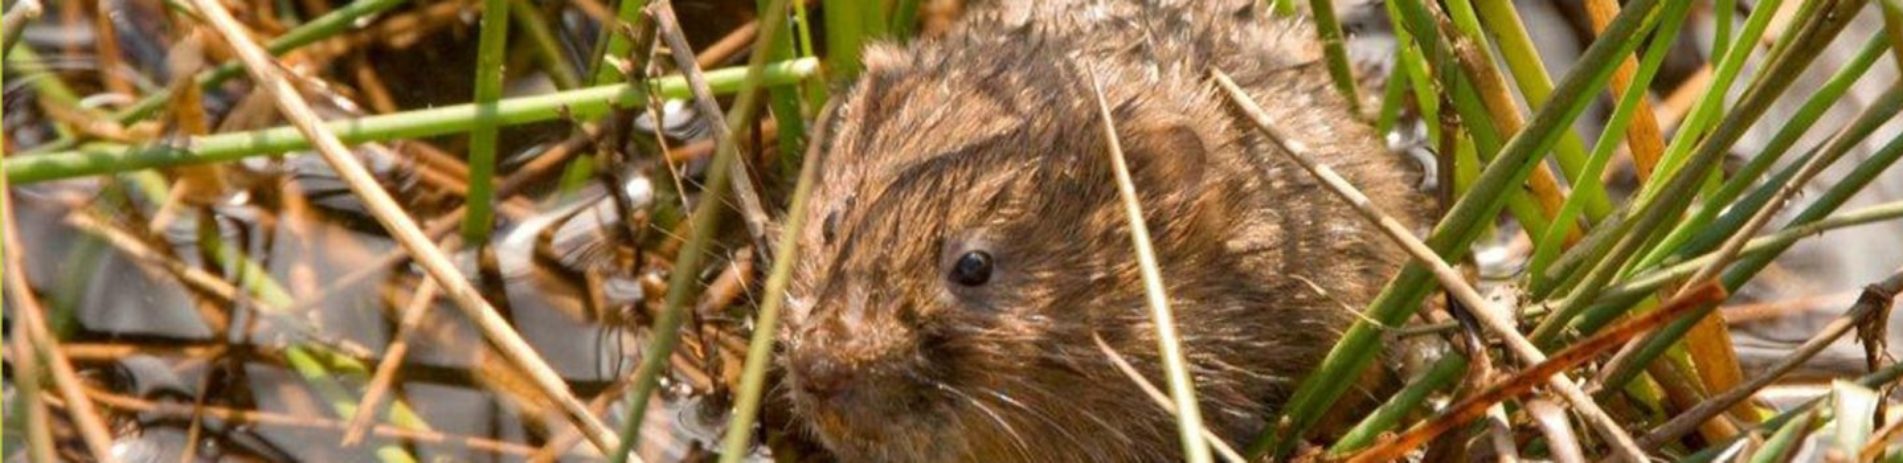 brown-vole-with-beady-bright-eyes-sitting-in-grass